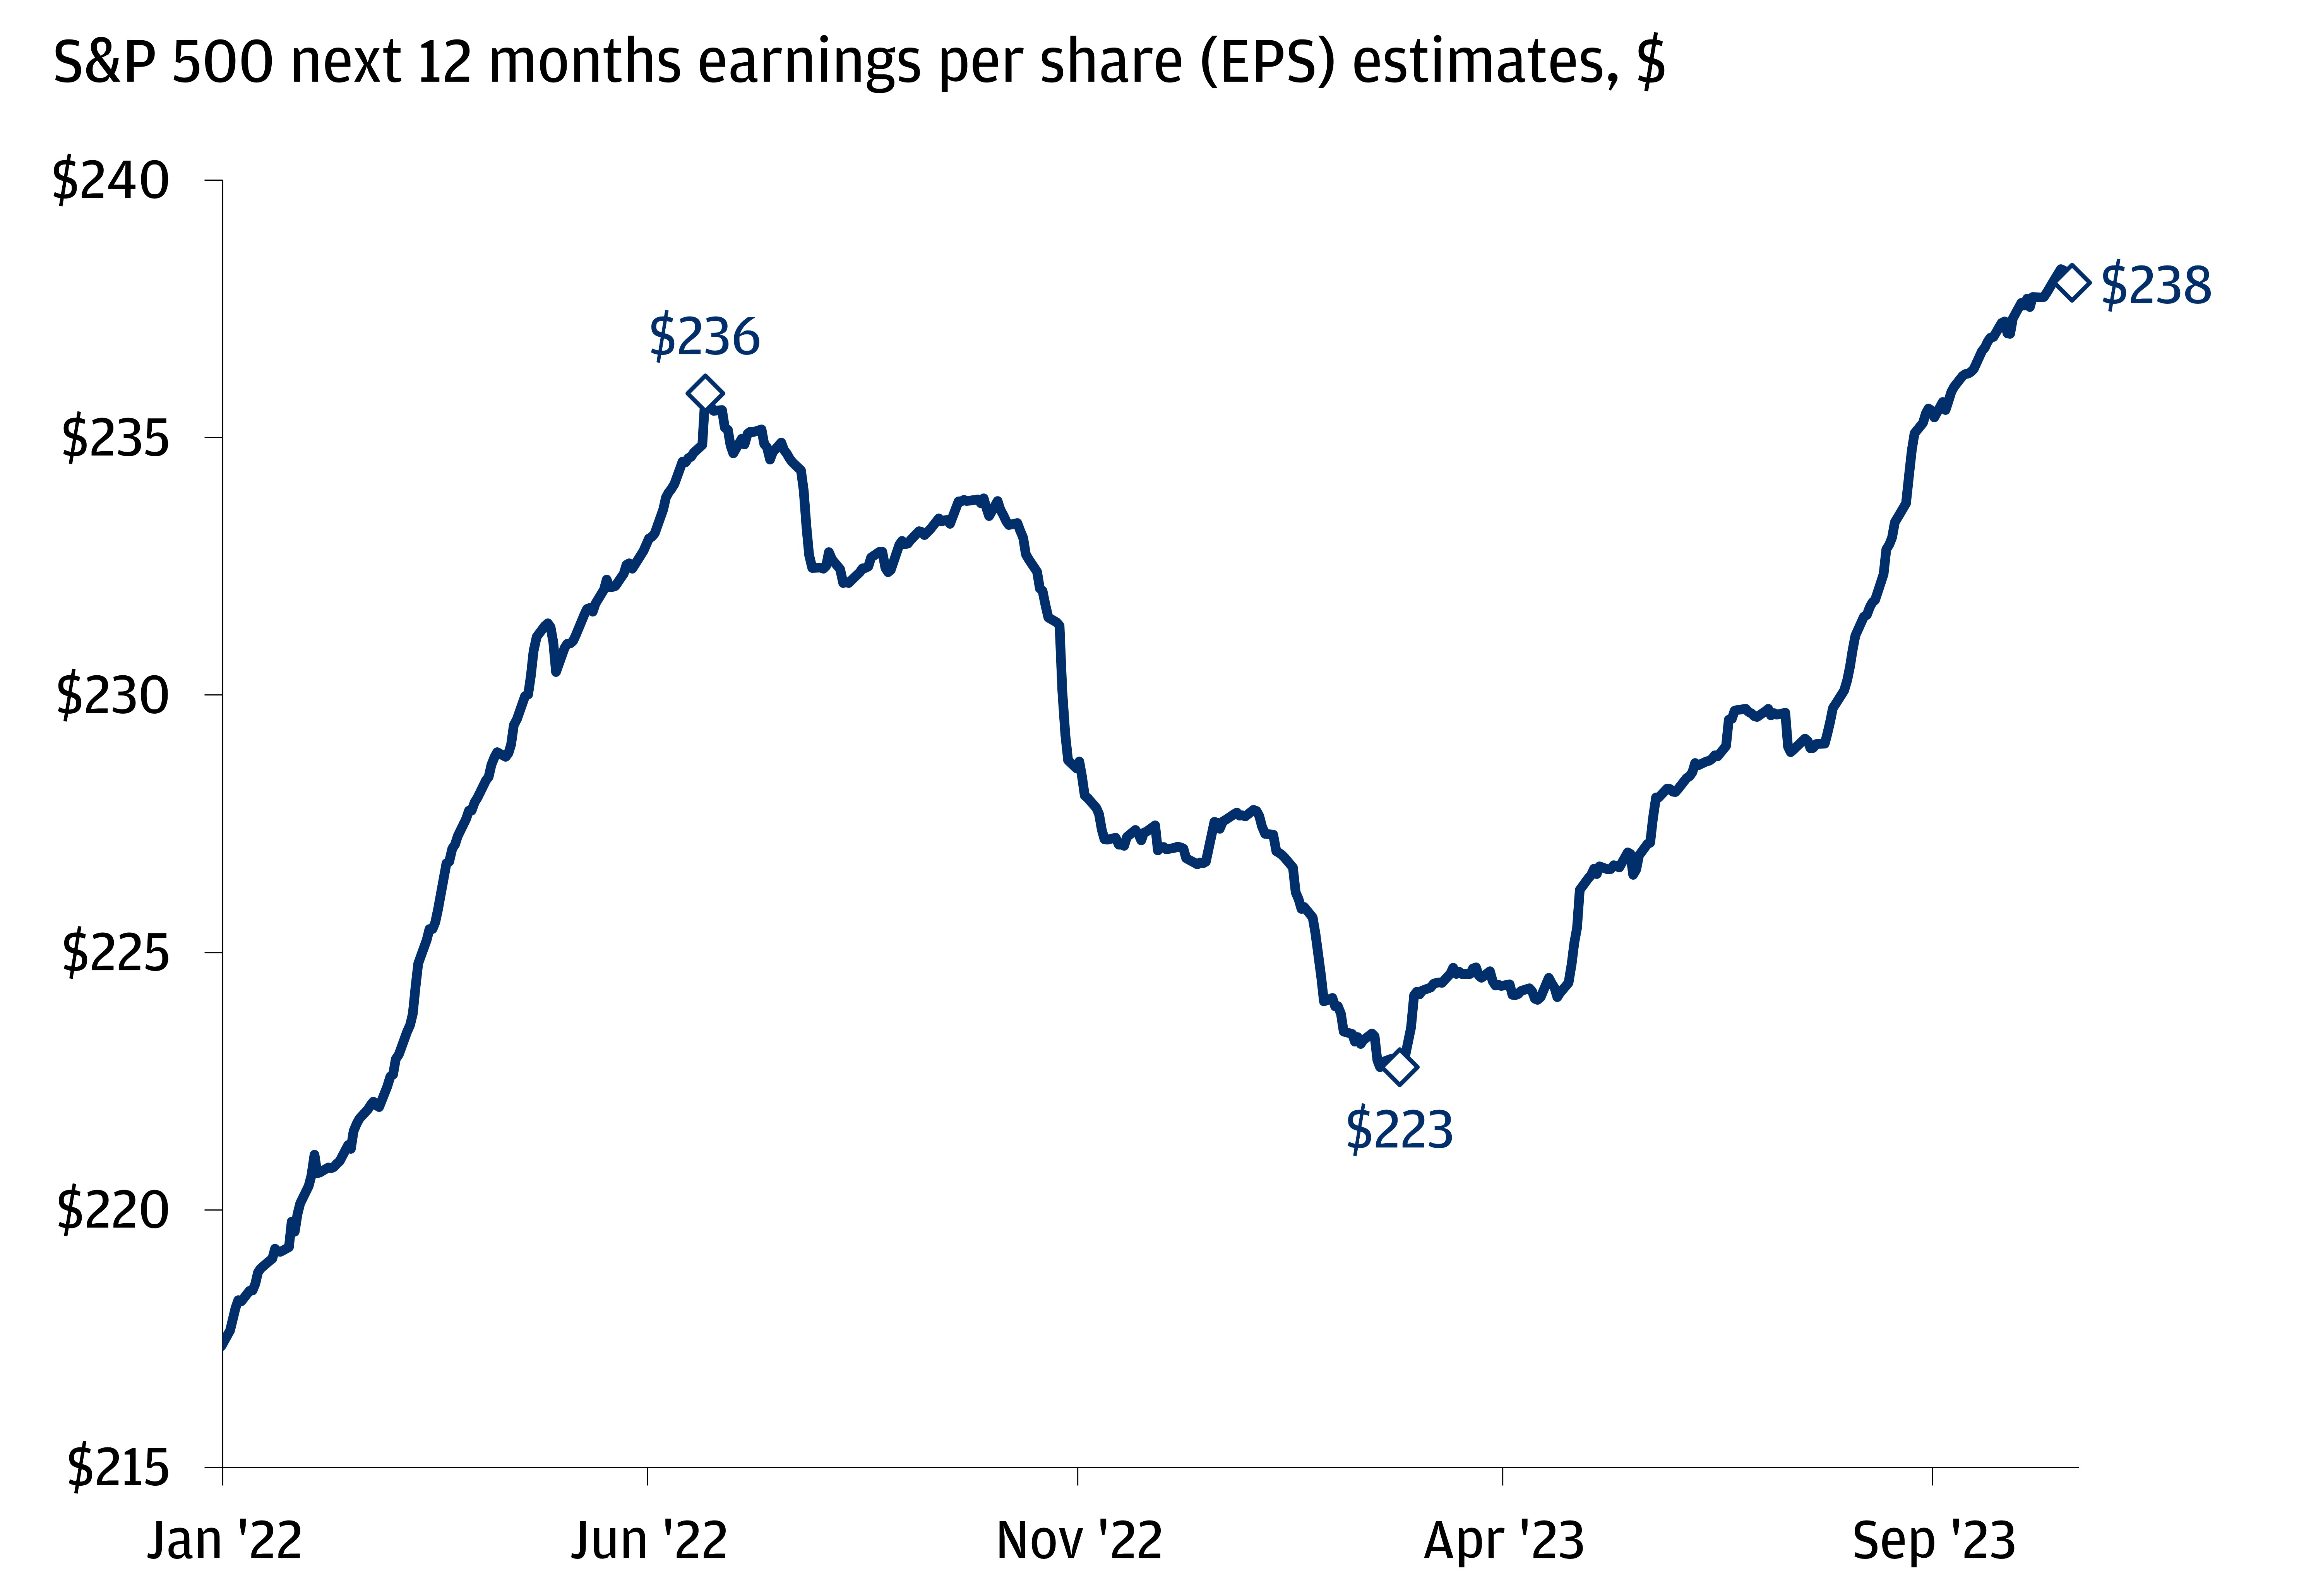 The chart describes the S&P 500 next 12 months earnings per share (EPS) estimates in $.